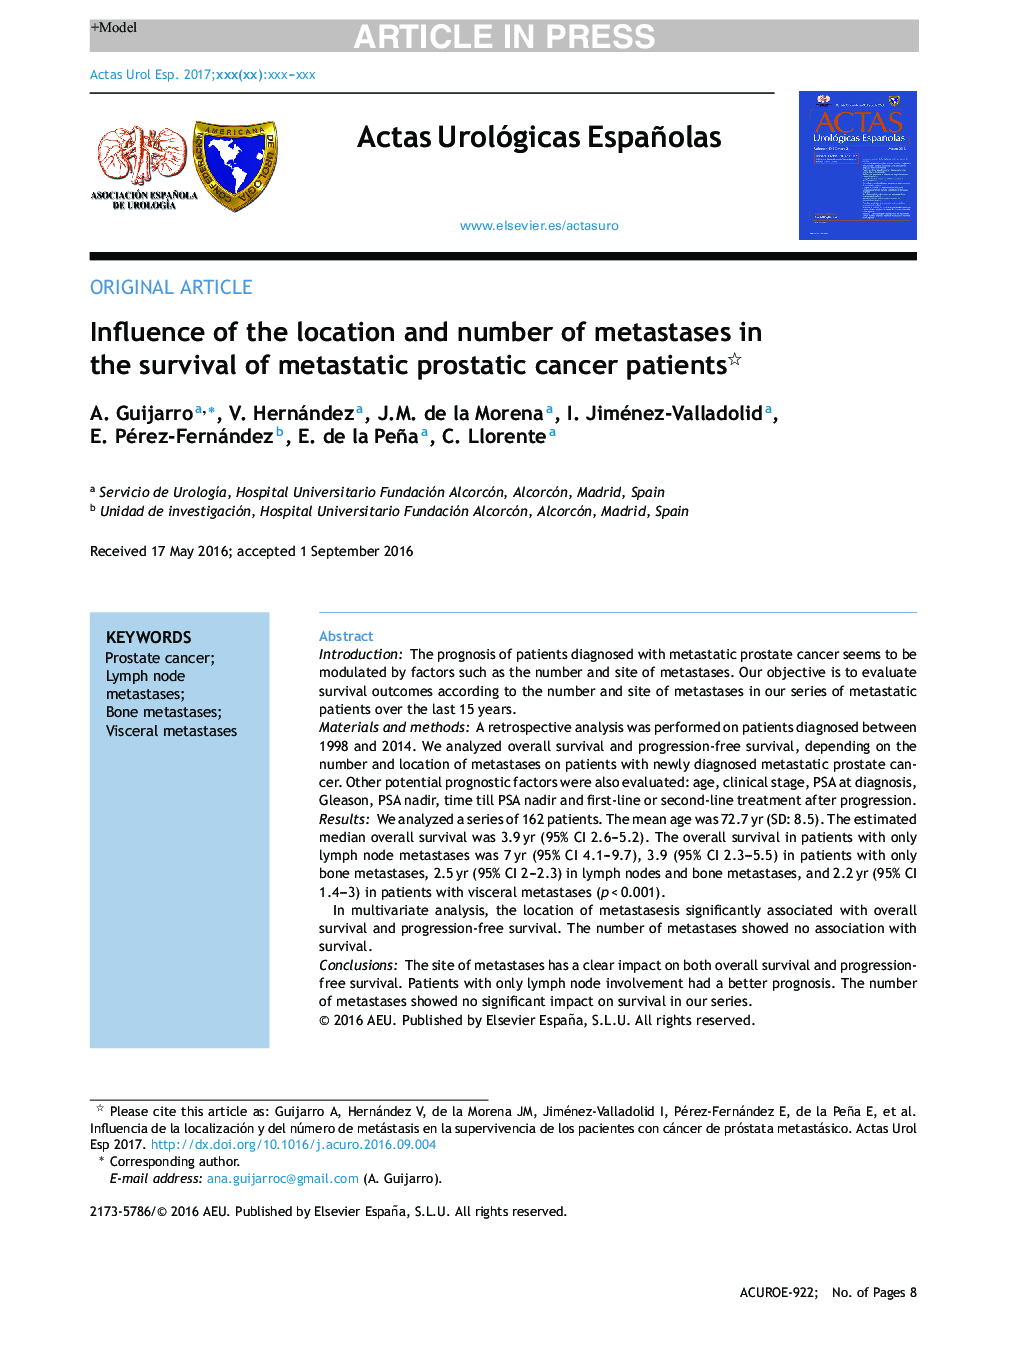 Influence of the location and number of metastases in the survival of metastatic prostatic cancer patients